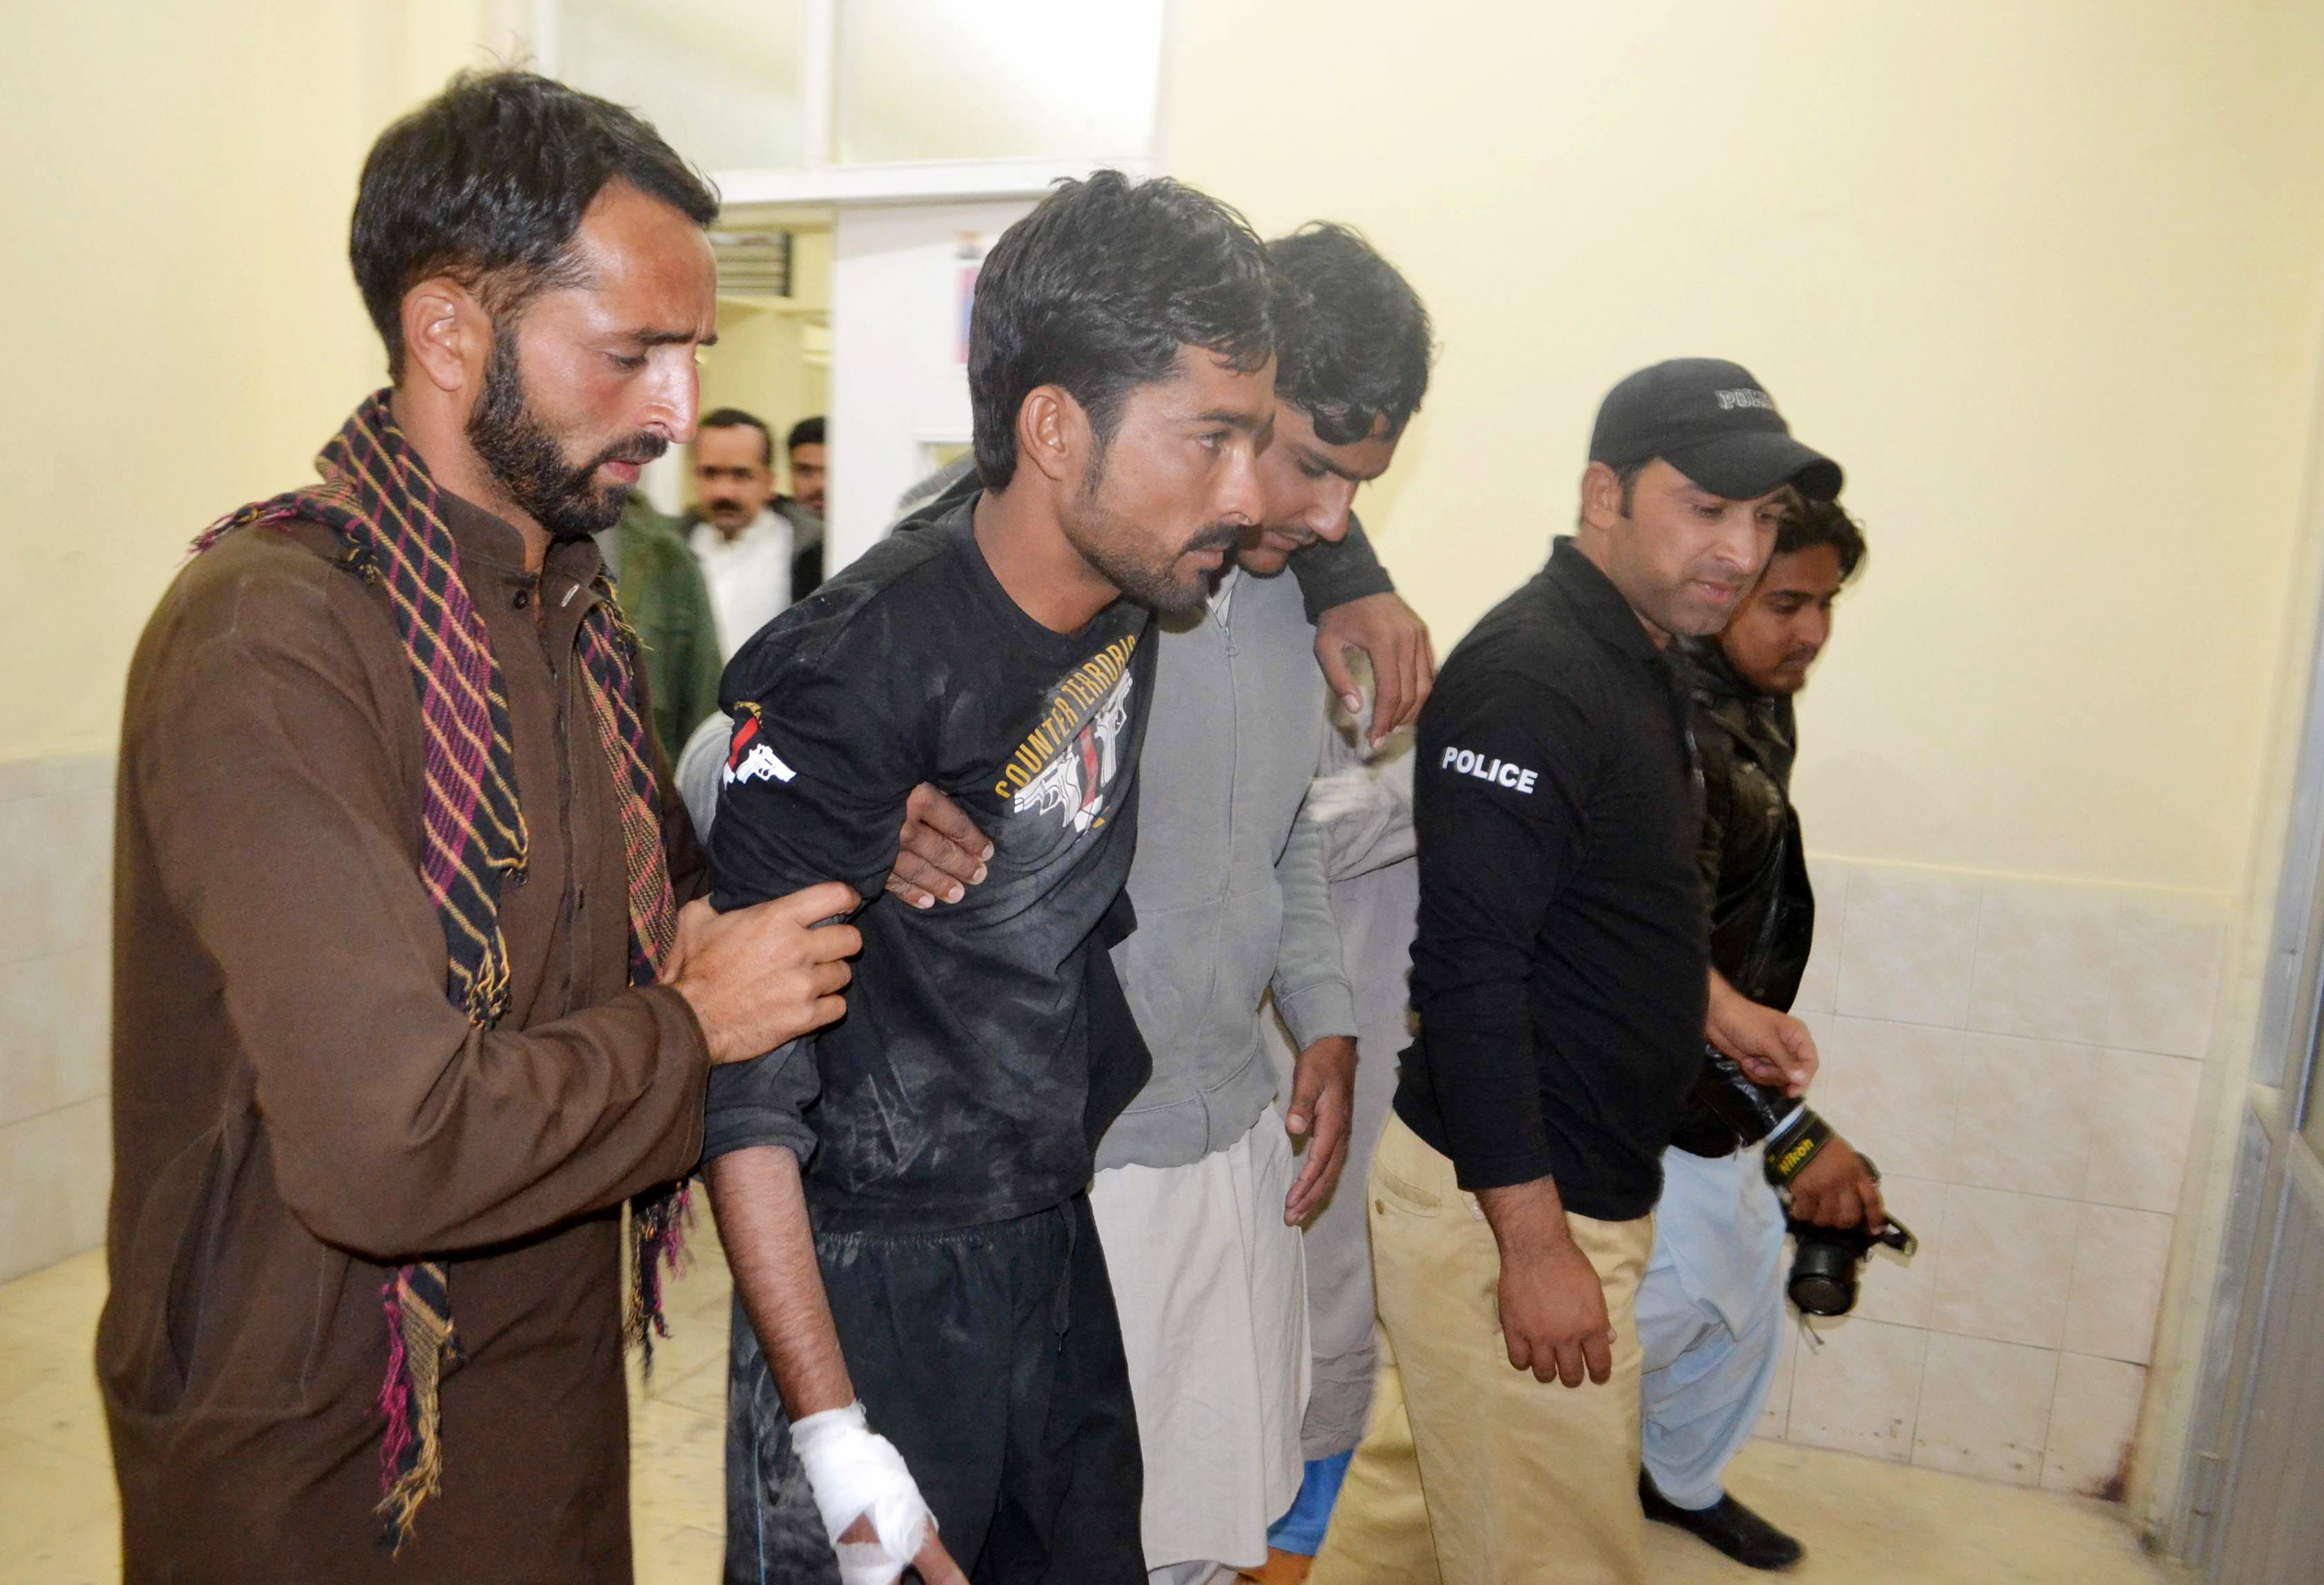 Police help an injured colleague into the hospital after militants attacked the Balochistan Police College in Quetta.